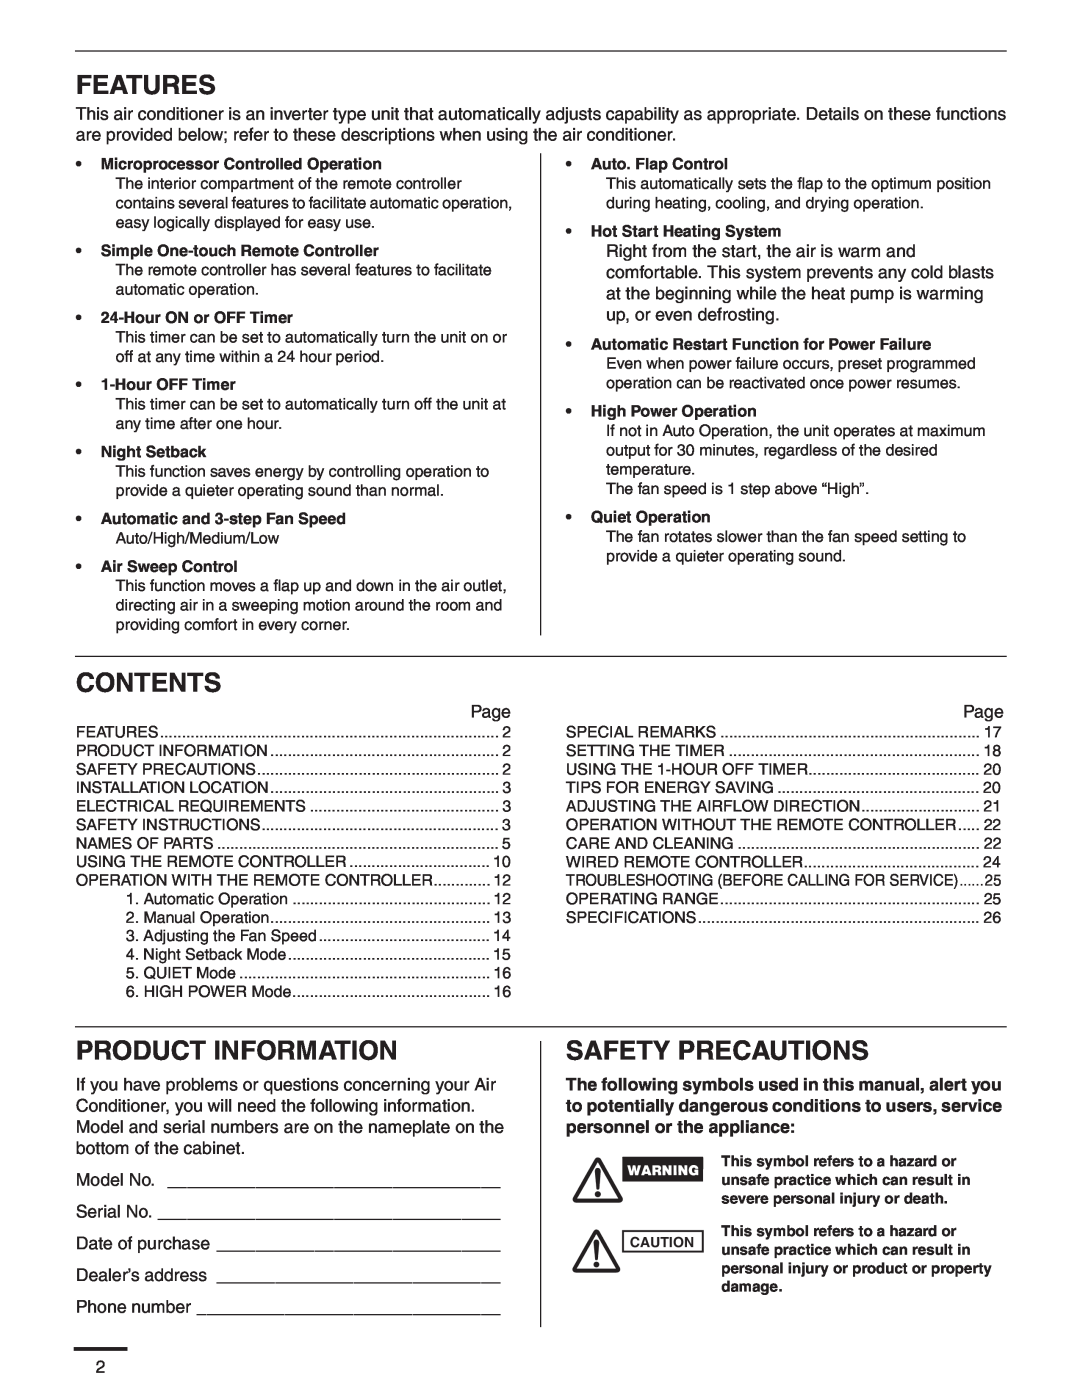 Panasonic CS-MKE7NKU, CS-MKE9NKU, CS-MKE18NKU, CS-MKE12NKU Features, Contents, Product Information, Safety Precautions 